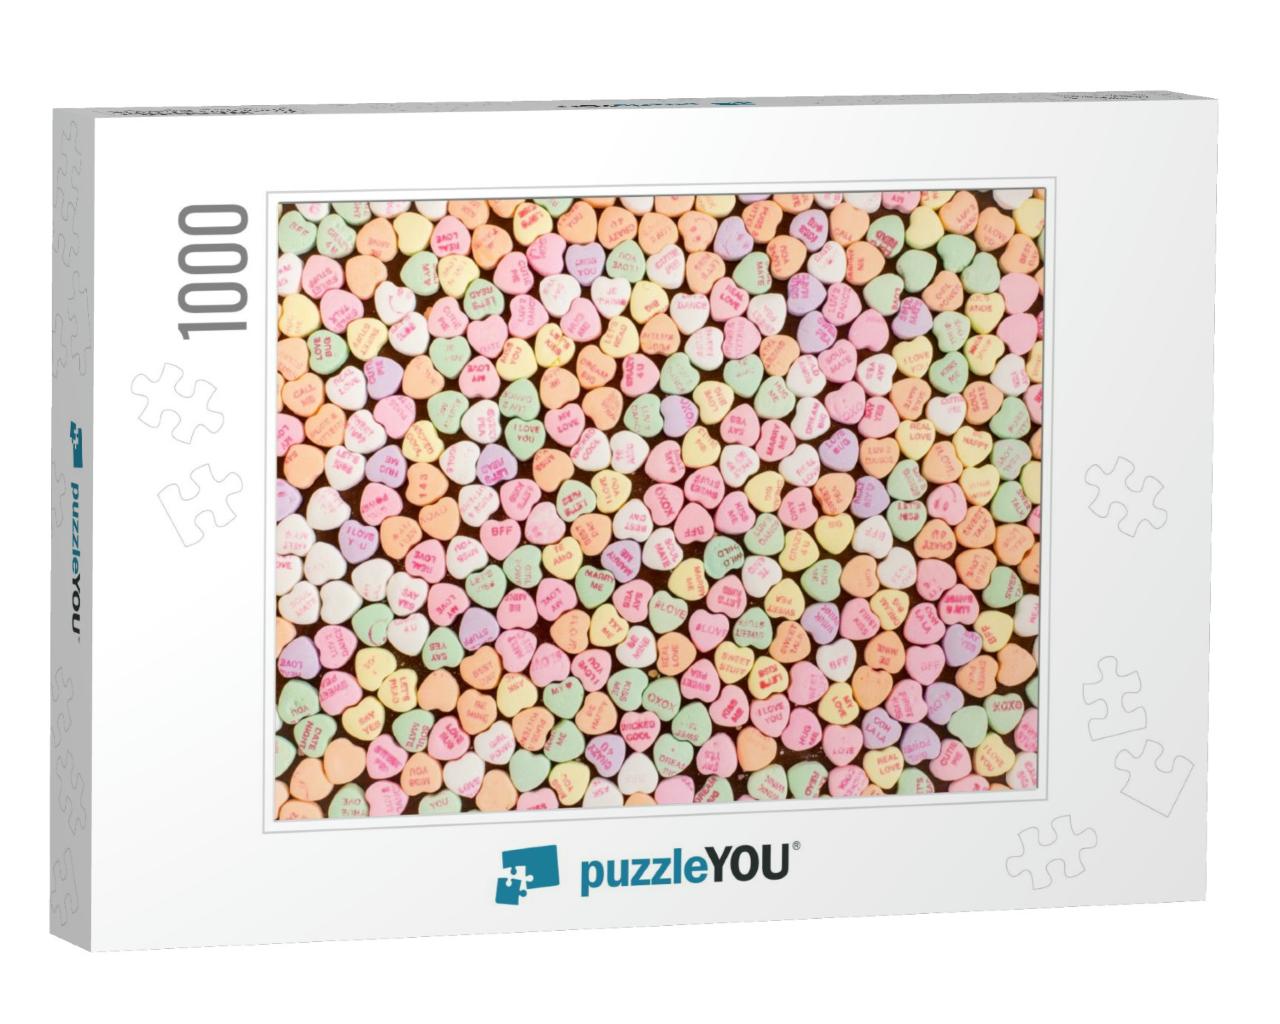 Background of Valentine Conversation Heart Candies... Jigsaw Puzzle with 1000 pieces